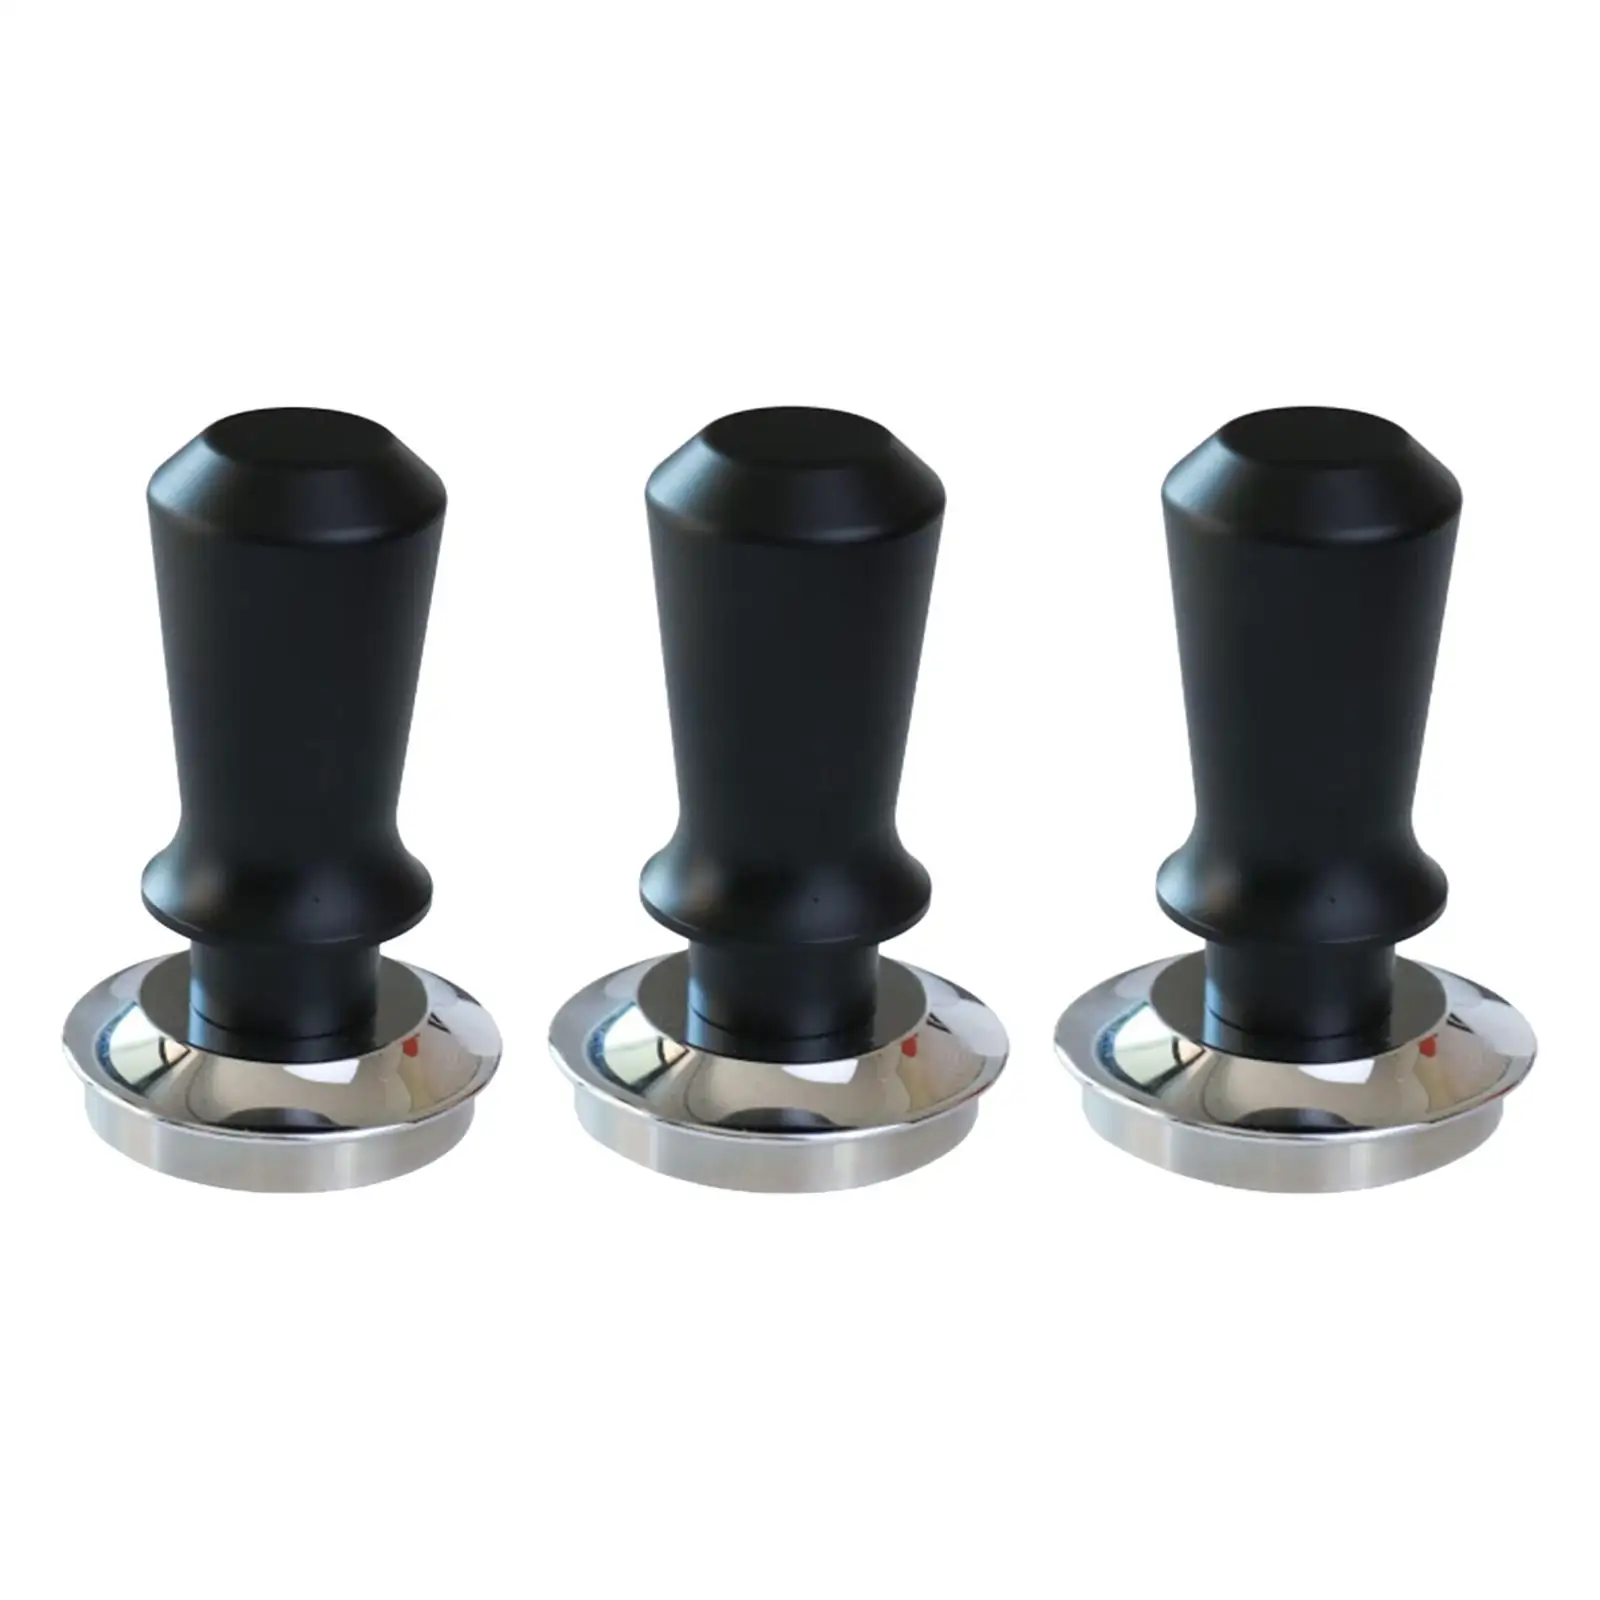 Espresso Tamper Aluminum Handle Tamper Coffee Hand Tamper for Kitchen Coffee Grounds Cafe Portafilter Accs